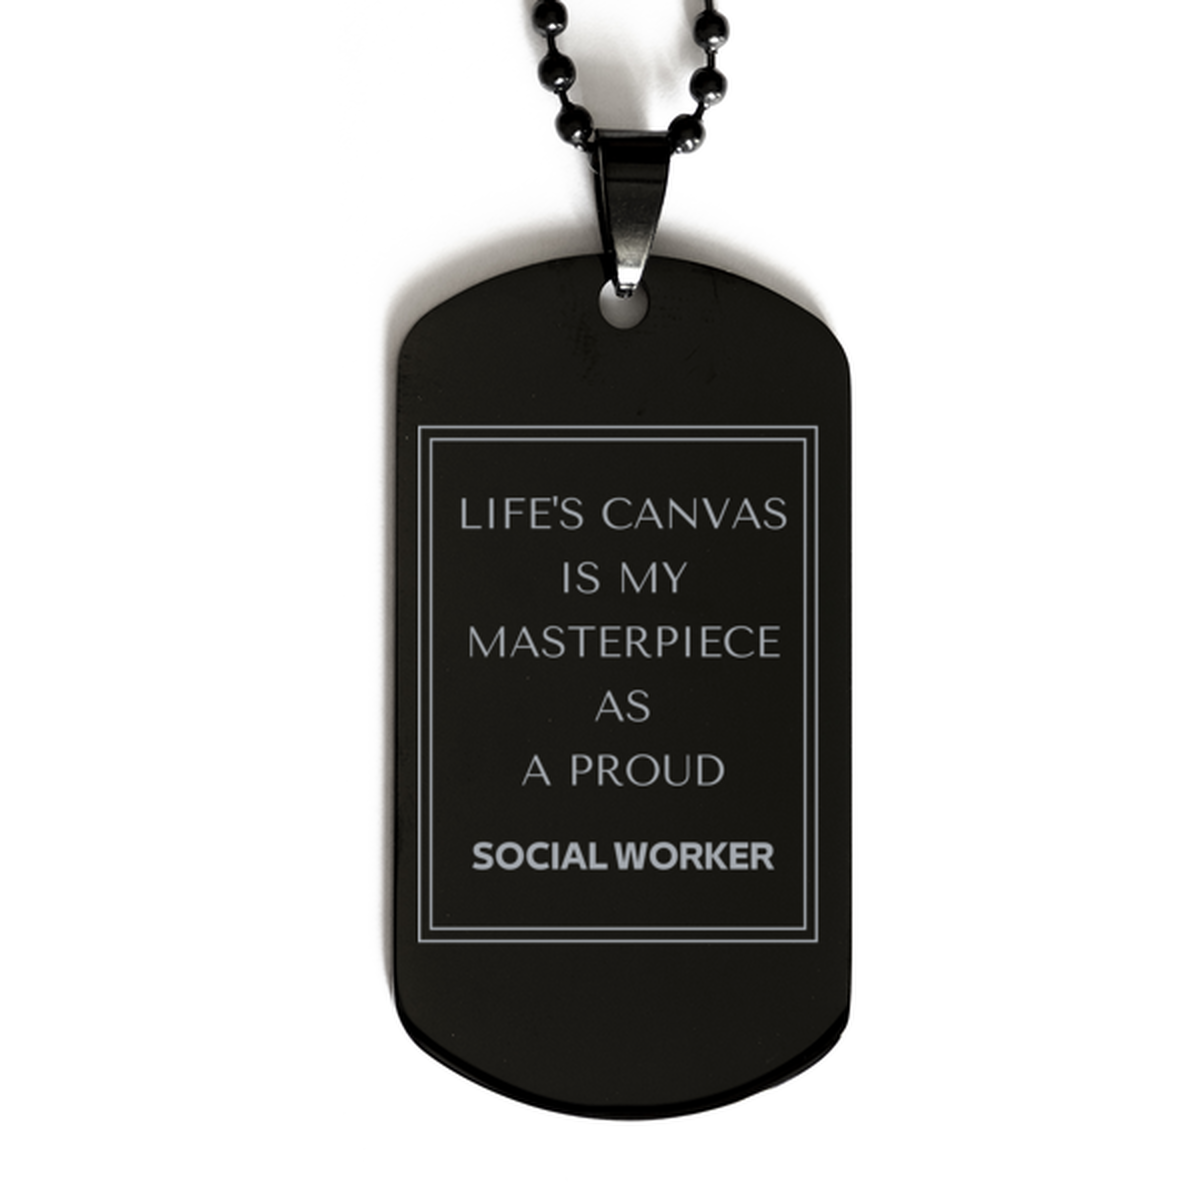 Proud Social Worker Gifts, Life's canvas is my masterpiece, Epic Birthday Christmas Unique Black Dog Tag For Social Worker, Coworkers, Men, Women, Friends